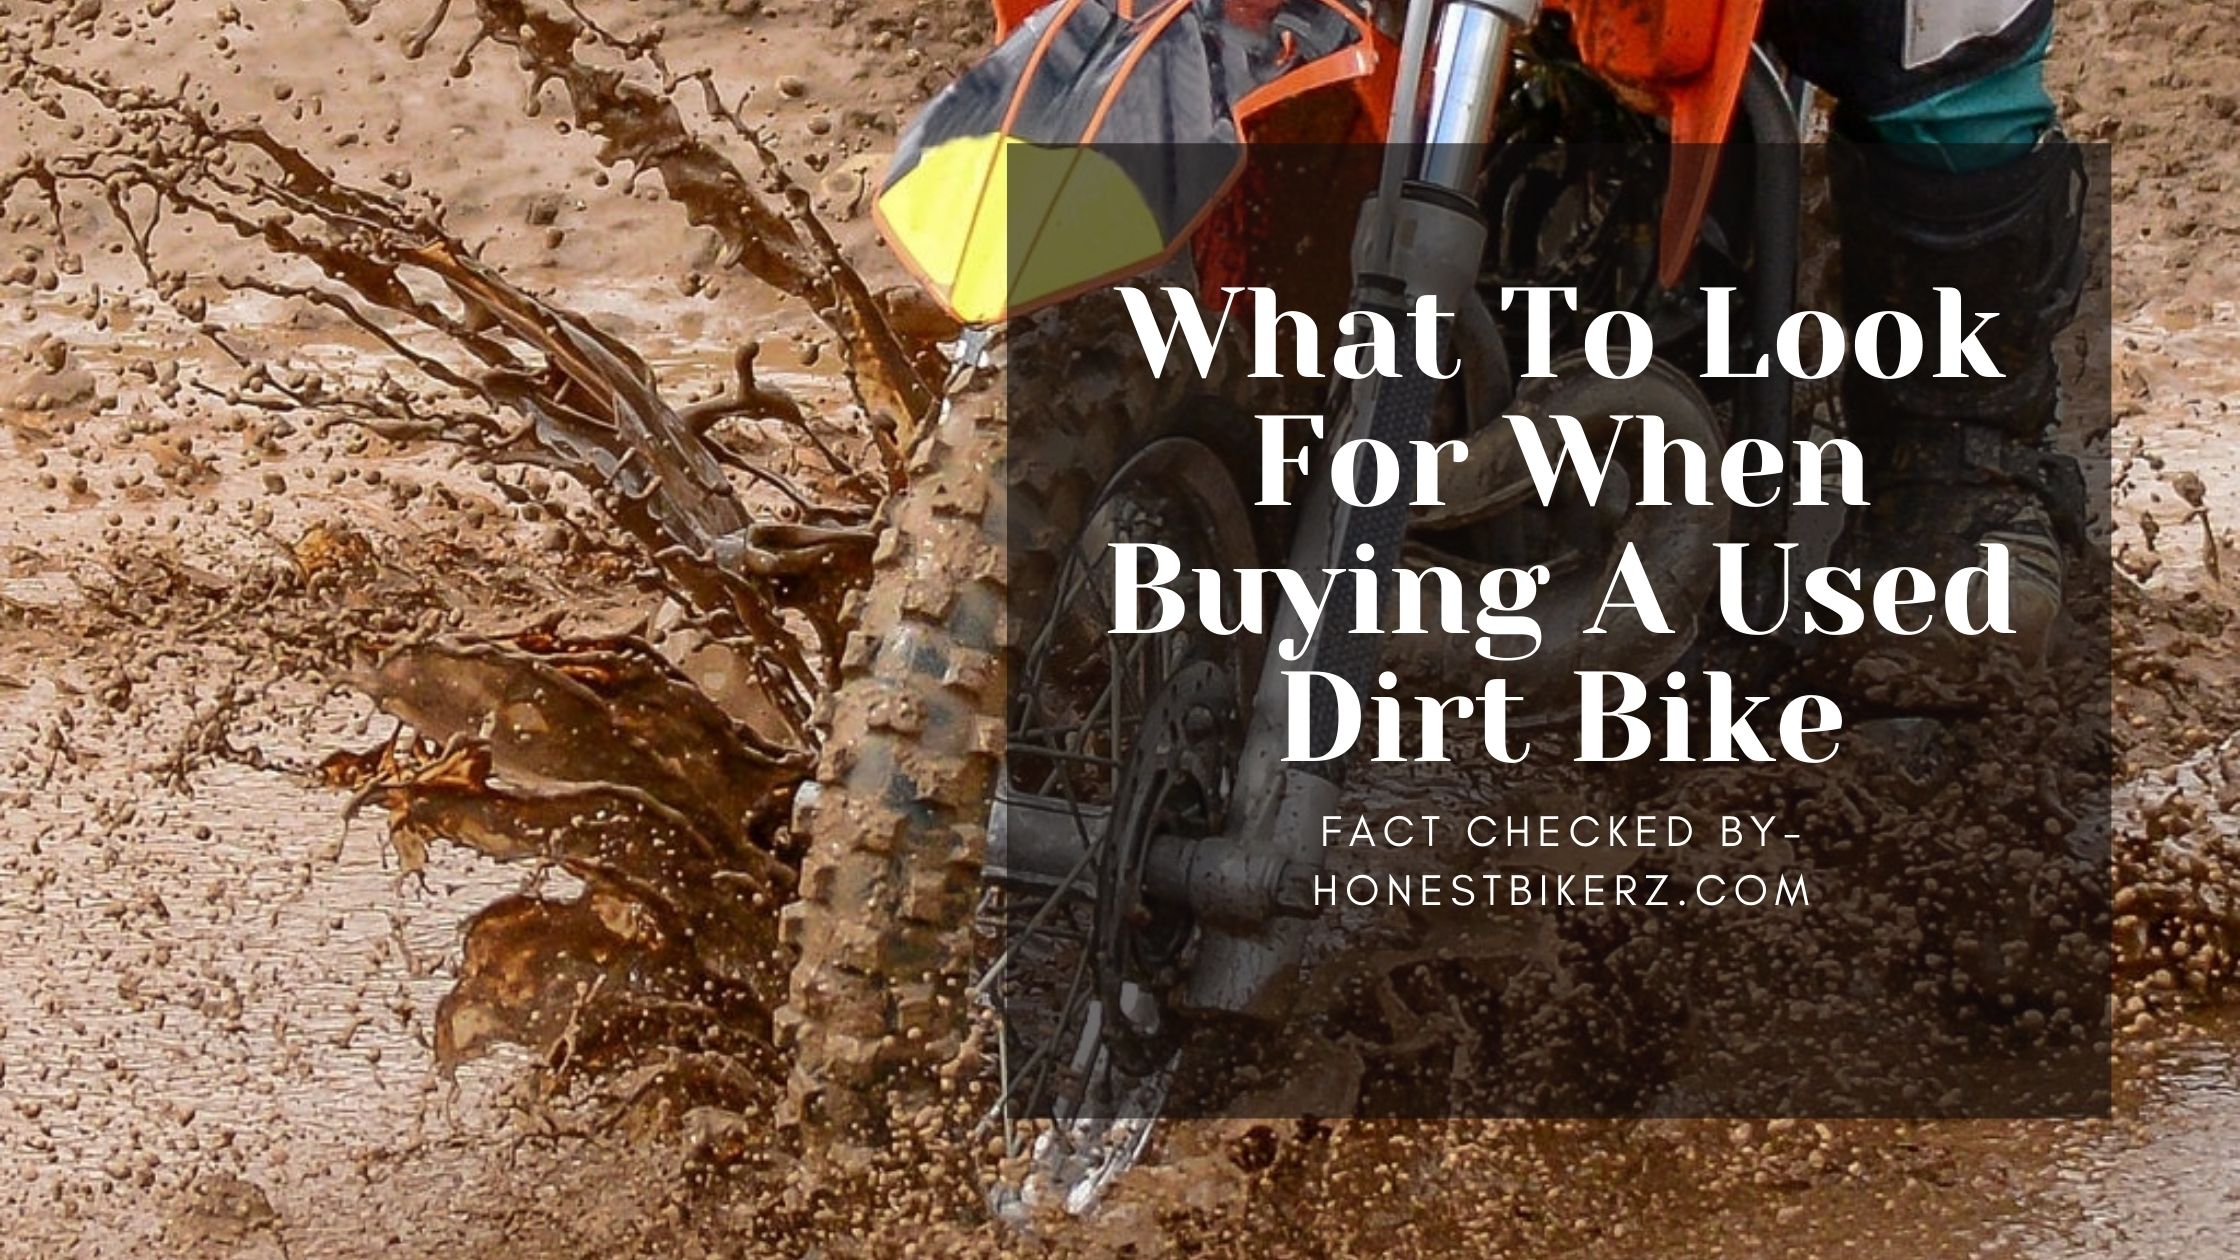 What to look for when buying a used dirt bike